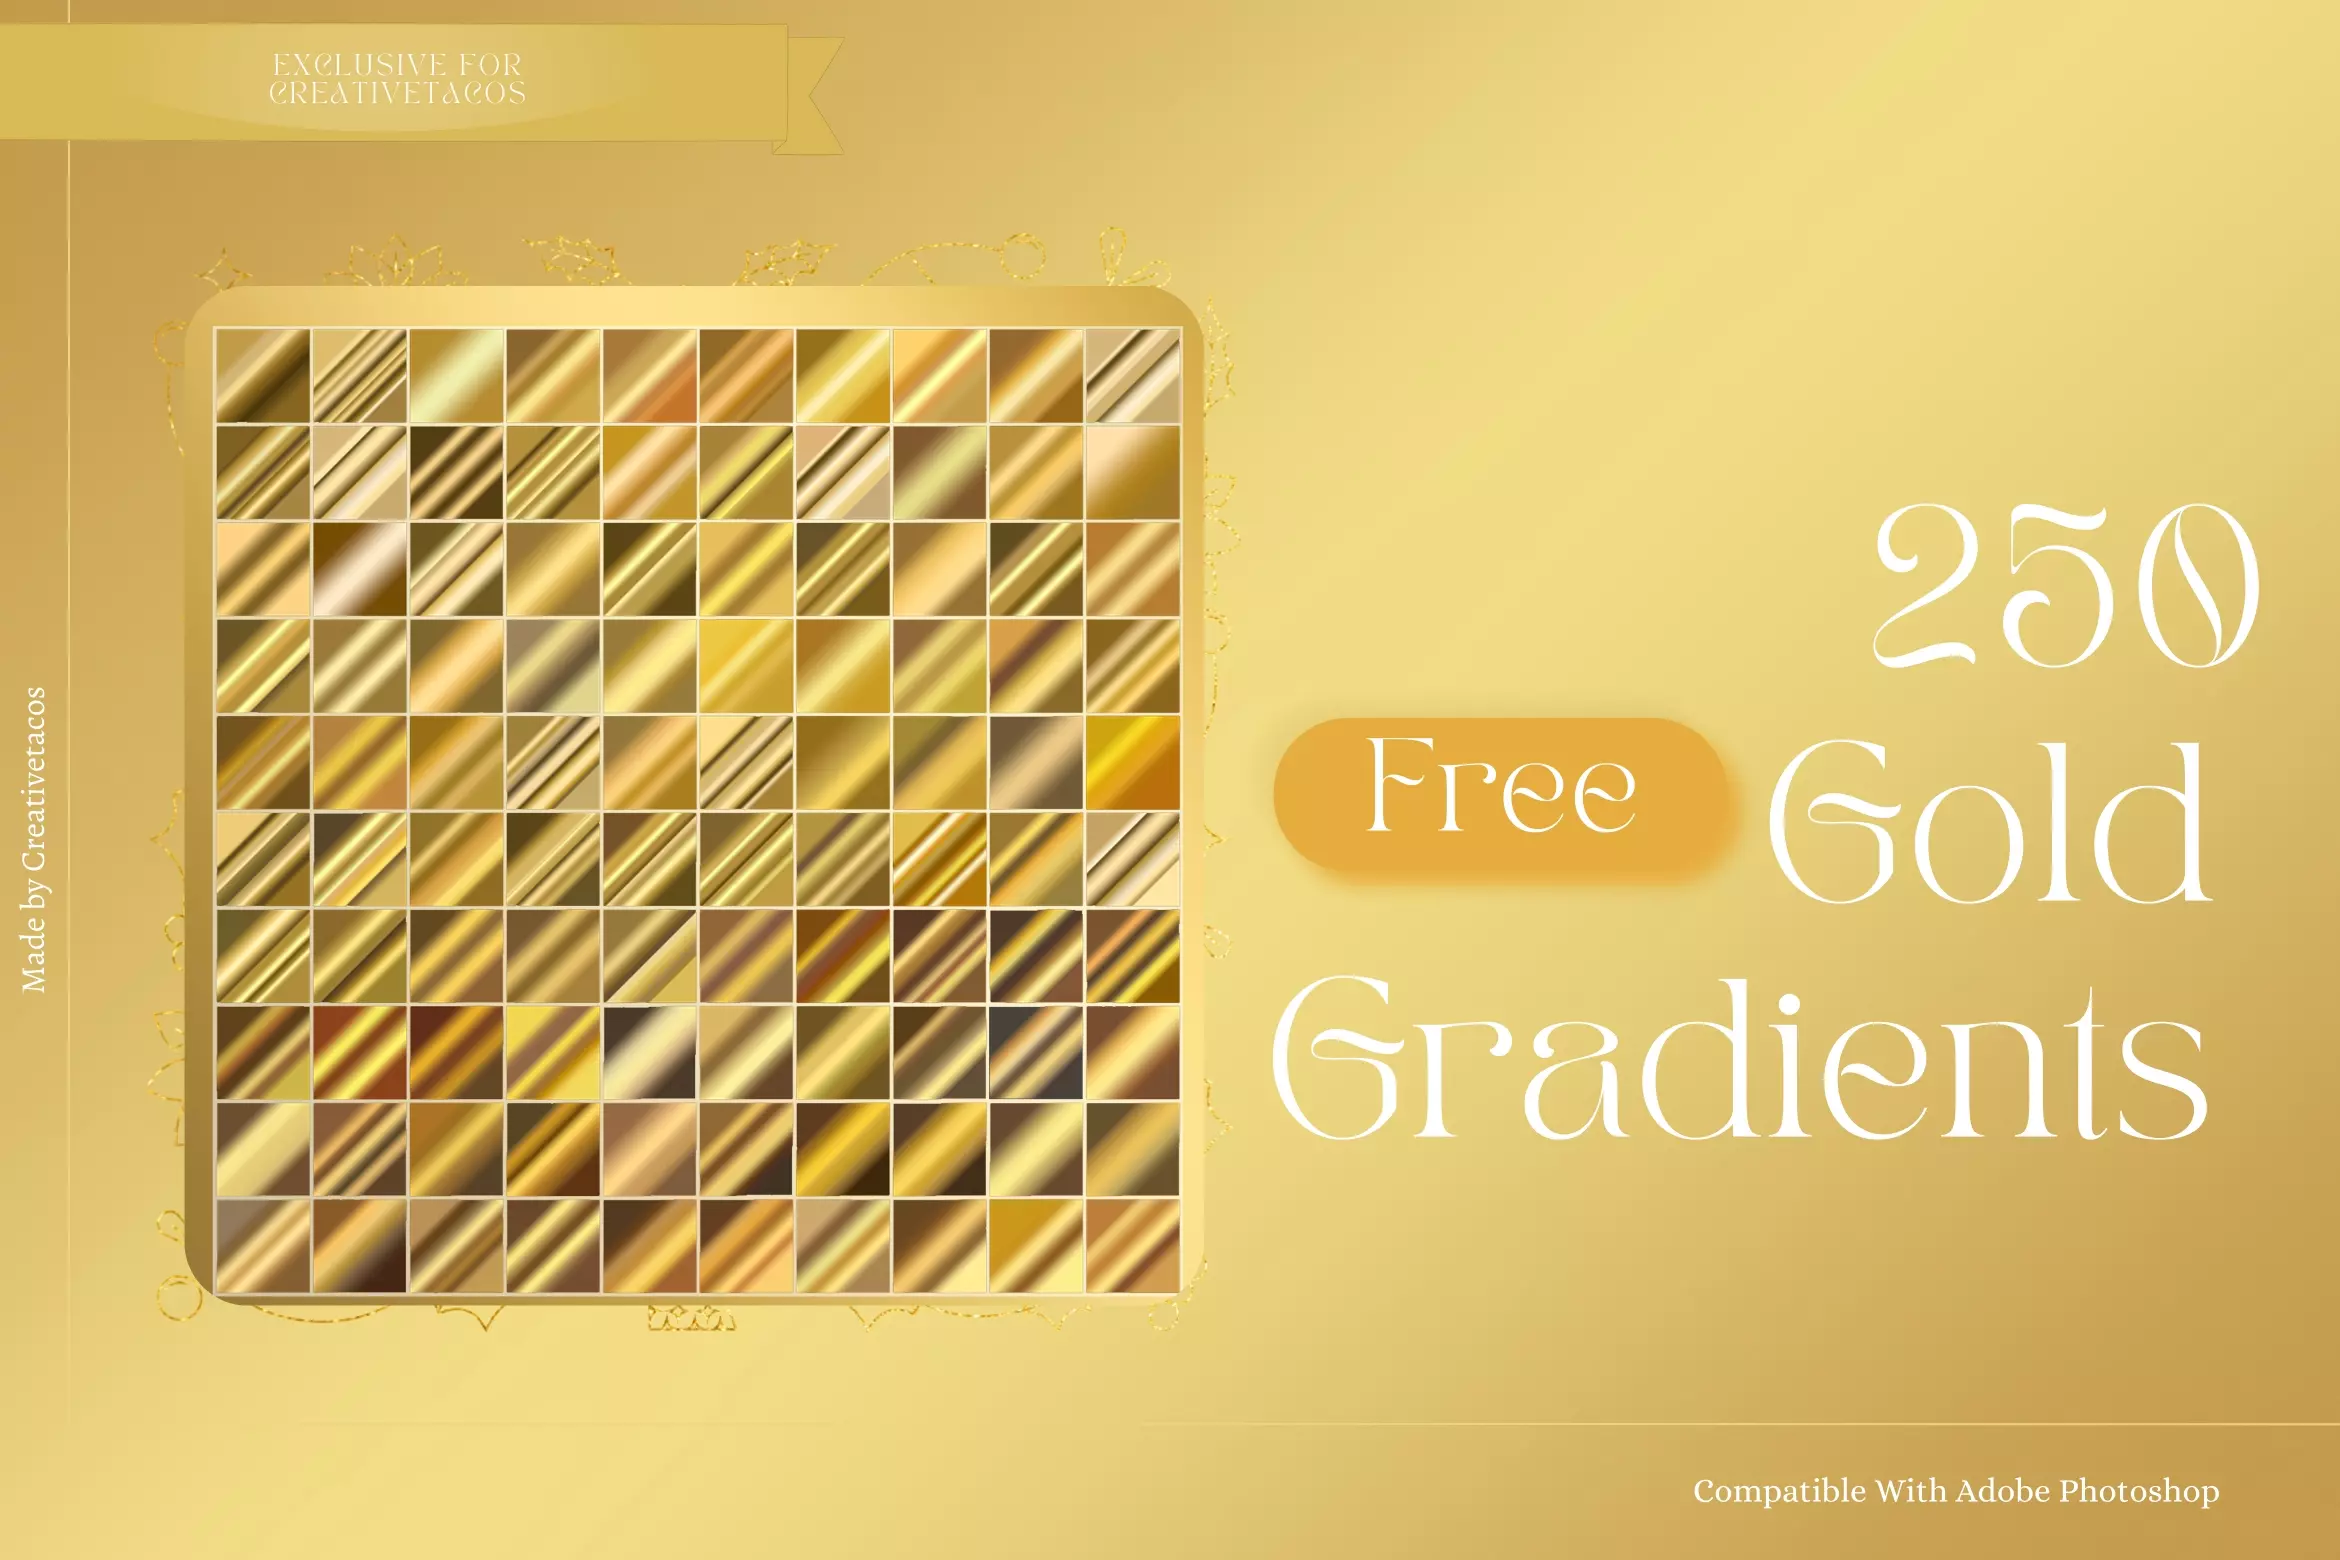 photoshop gold gradient pack free download